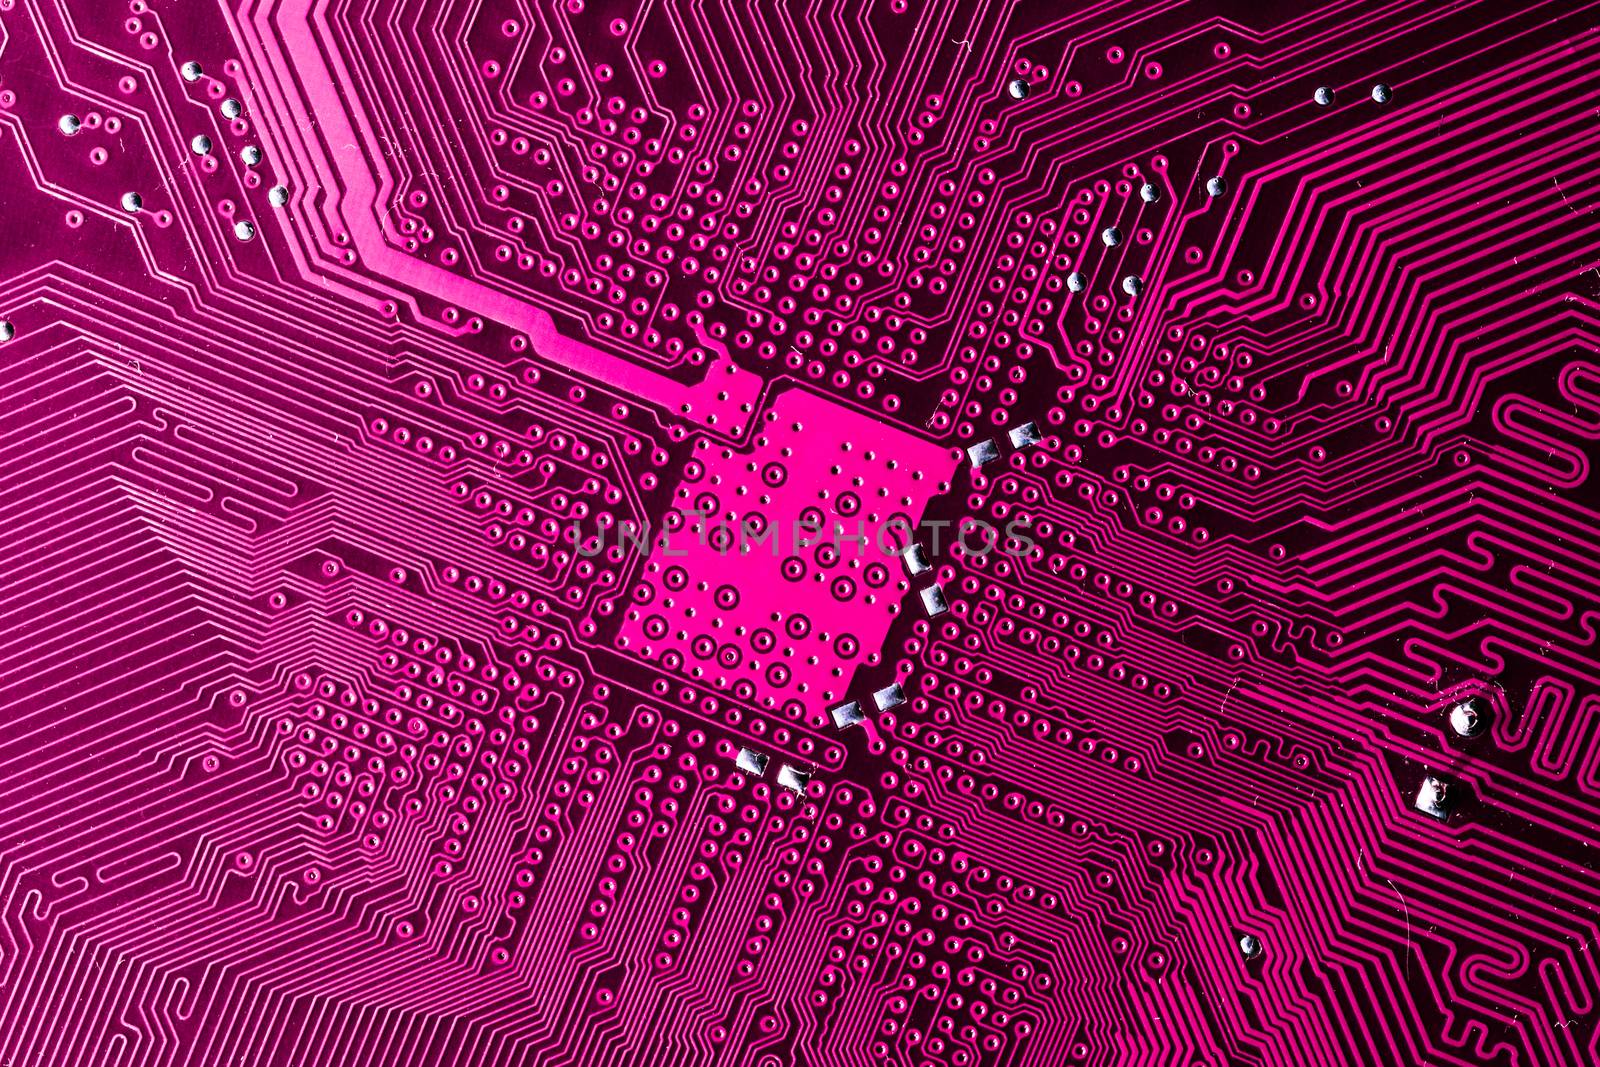 Close up photo of pink printecd circuit board with solder points